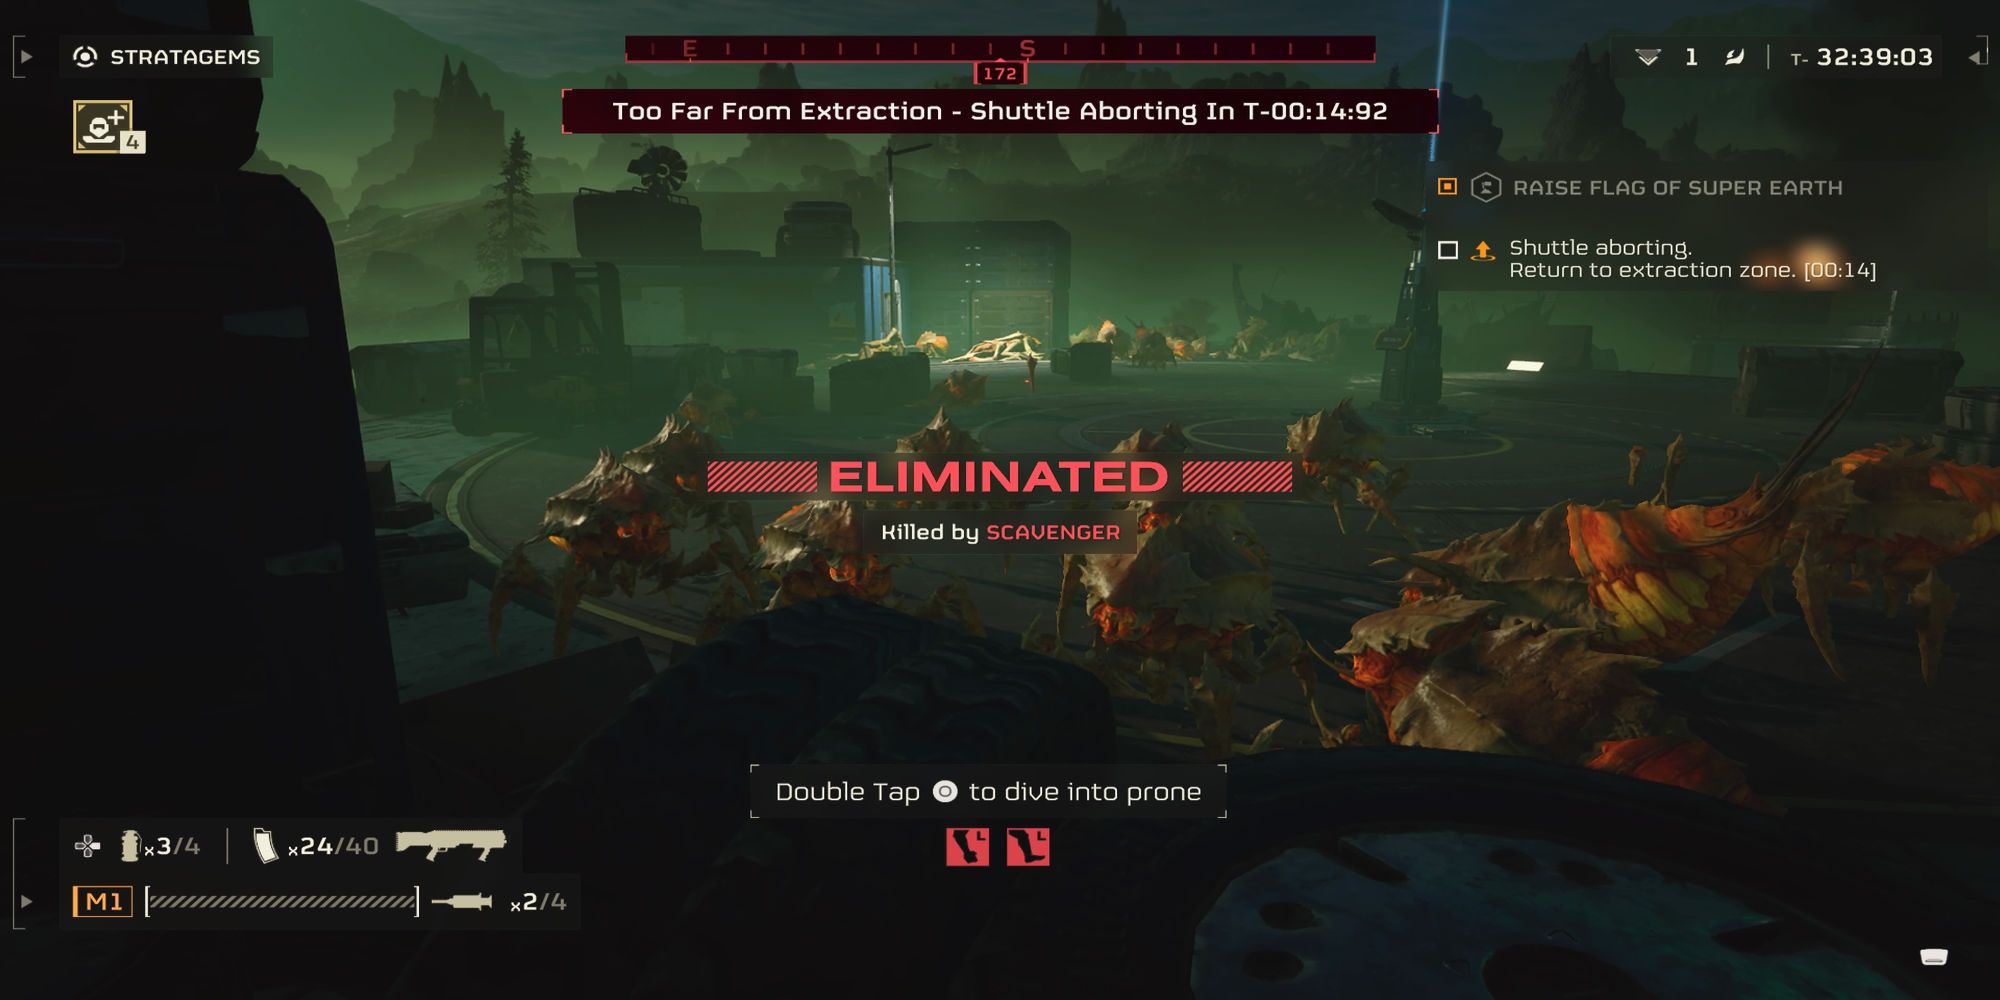 A screen showing the "Eliminated" message from Helldivers 2. Enemy bugs are swarming the area